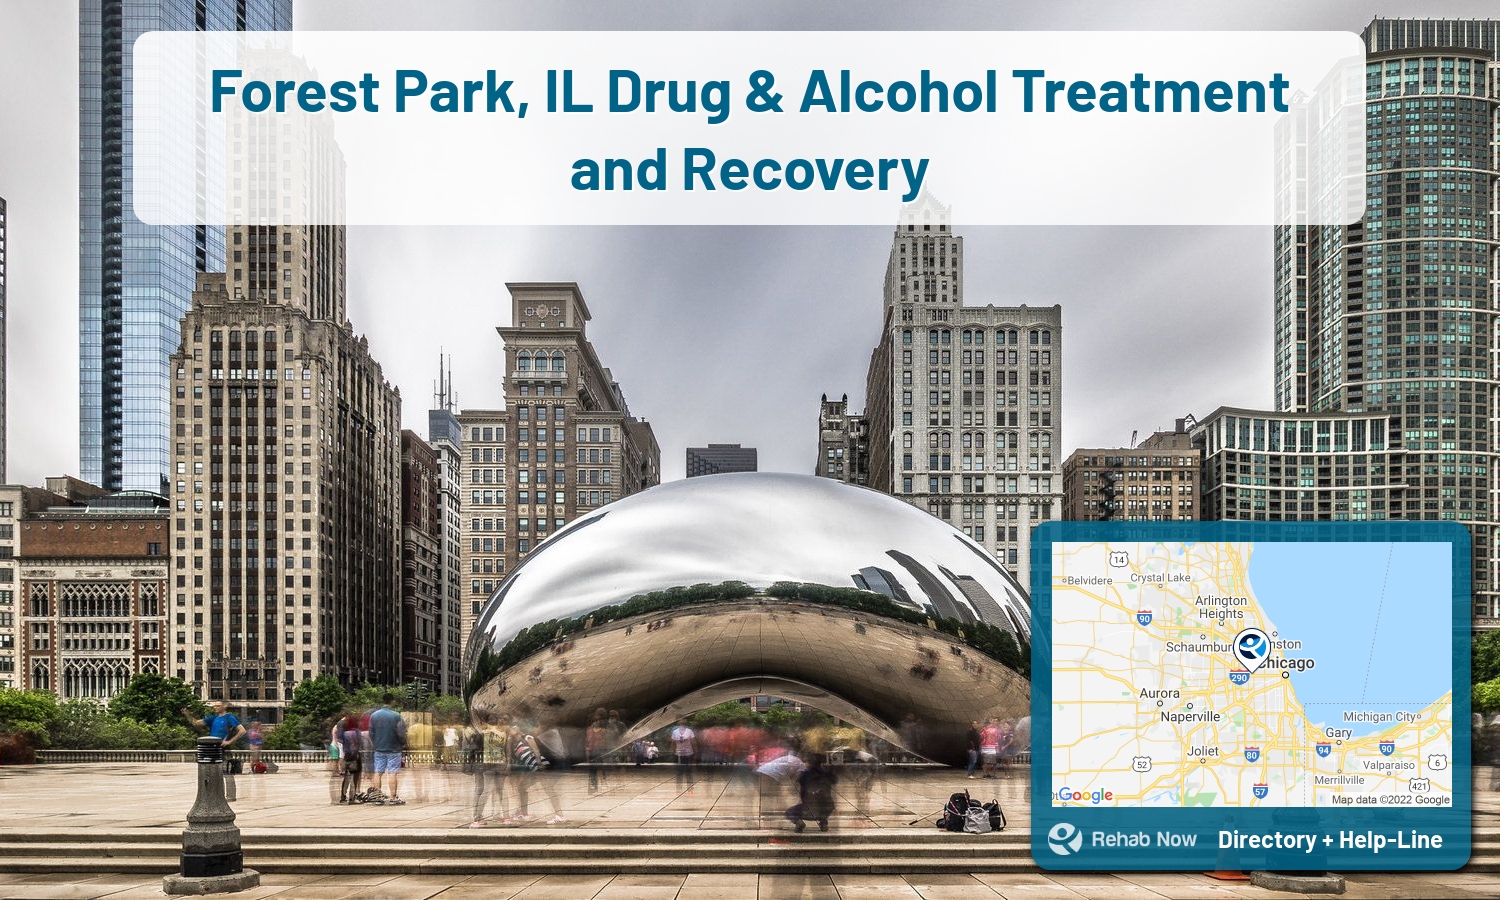 Drug rehab and alcohol treatment services nearby Forest Park, IL. Need help choosing a treatment program? Call our free hotline!